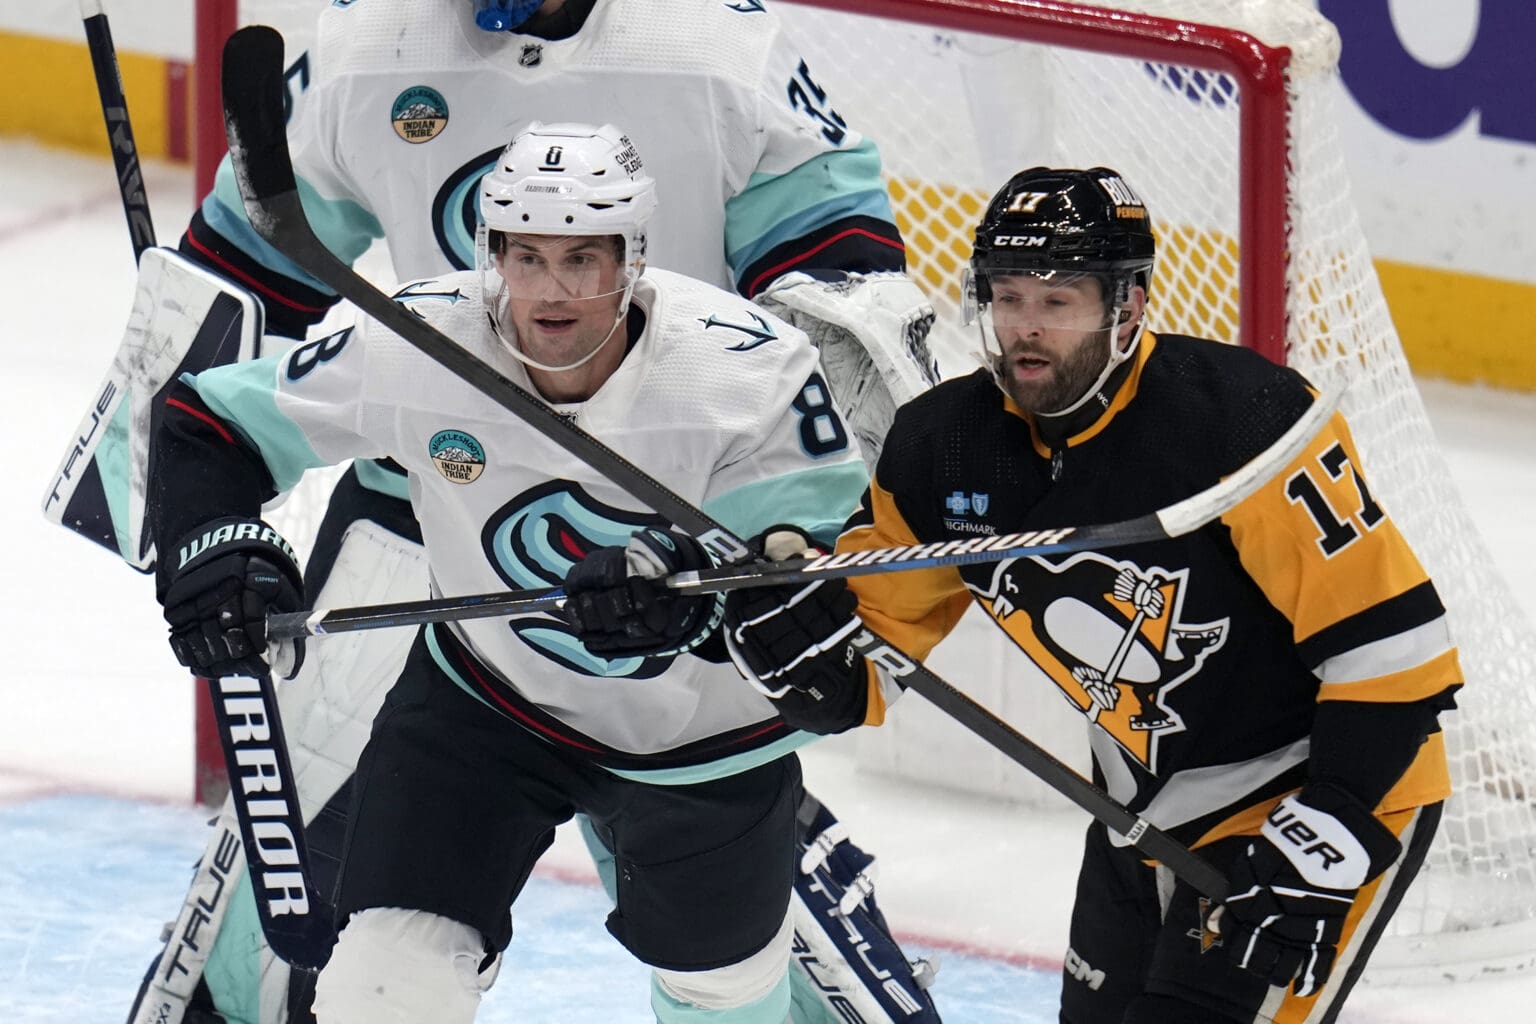 Seattle Kraken's Brian Dumoulin battles for control with Pittsburgh Penguins' Bryan Rust as their hockey sticks are tangled with each other.